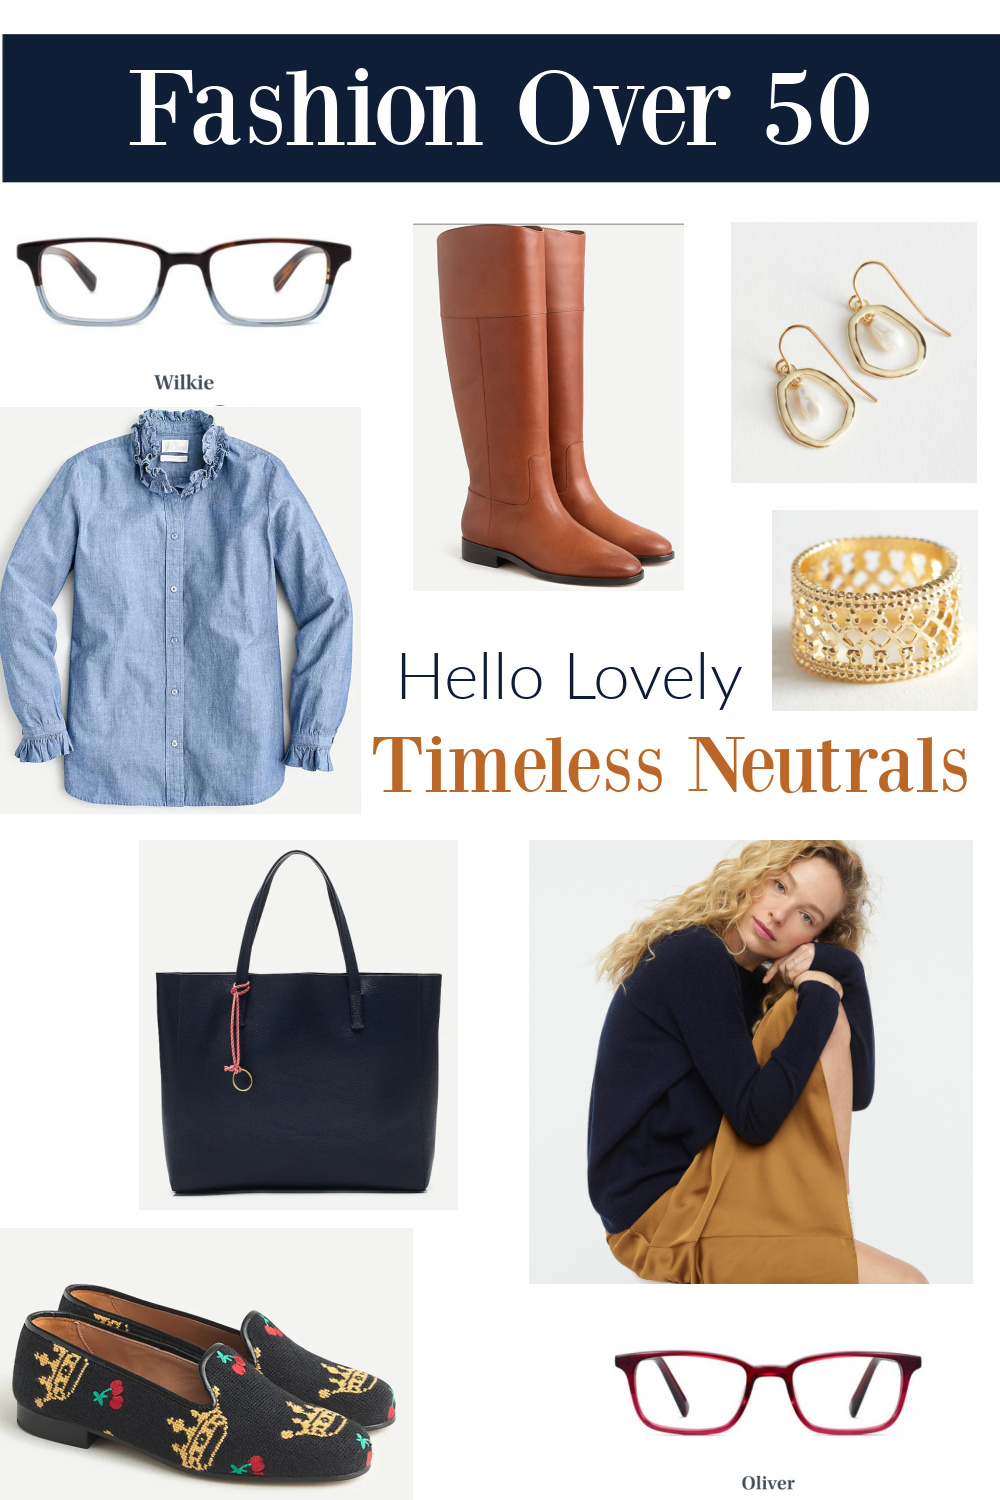 Fashion Over 50 Hello Lovely Timeless Neutrals - come shop the look!